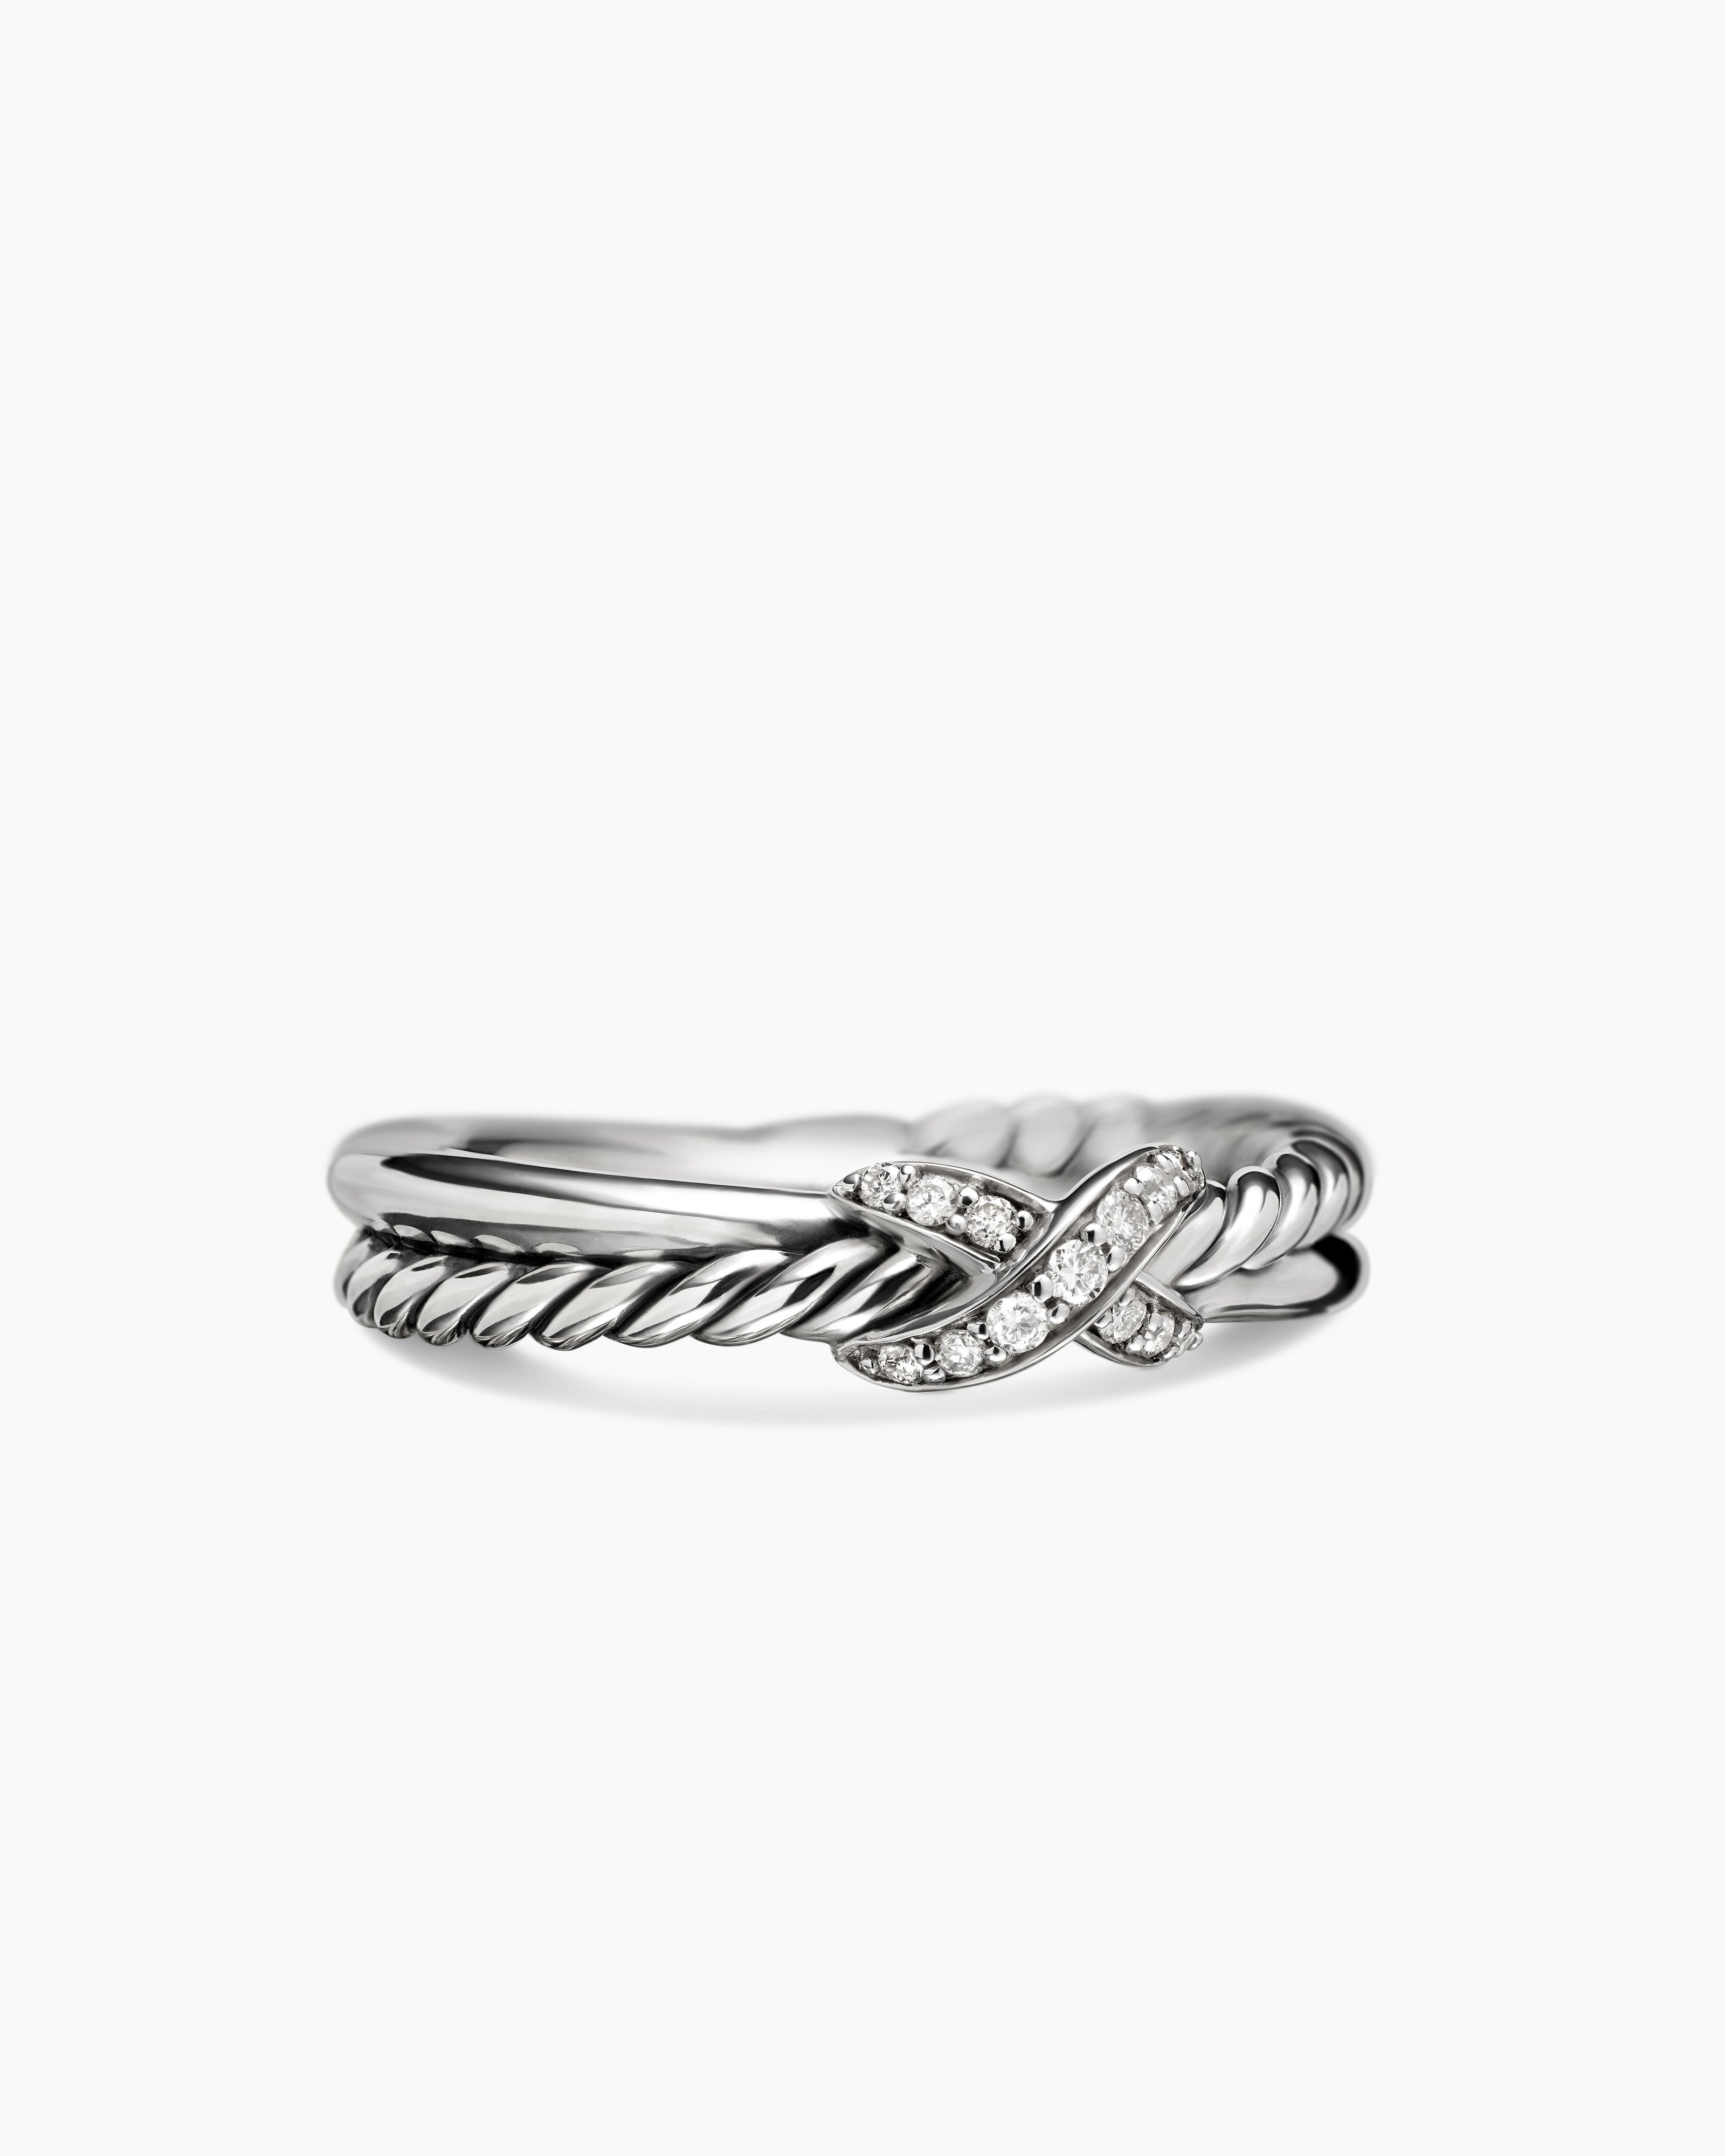 Buy Sterling Silver Crisscross Ring, Silver Rings, X Shape Ring, Cross Ring  Online in India - Etsy